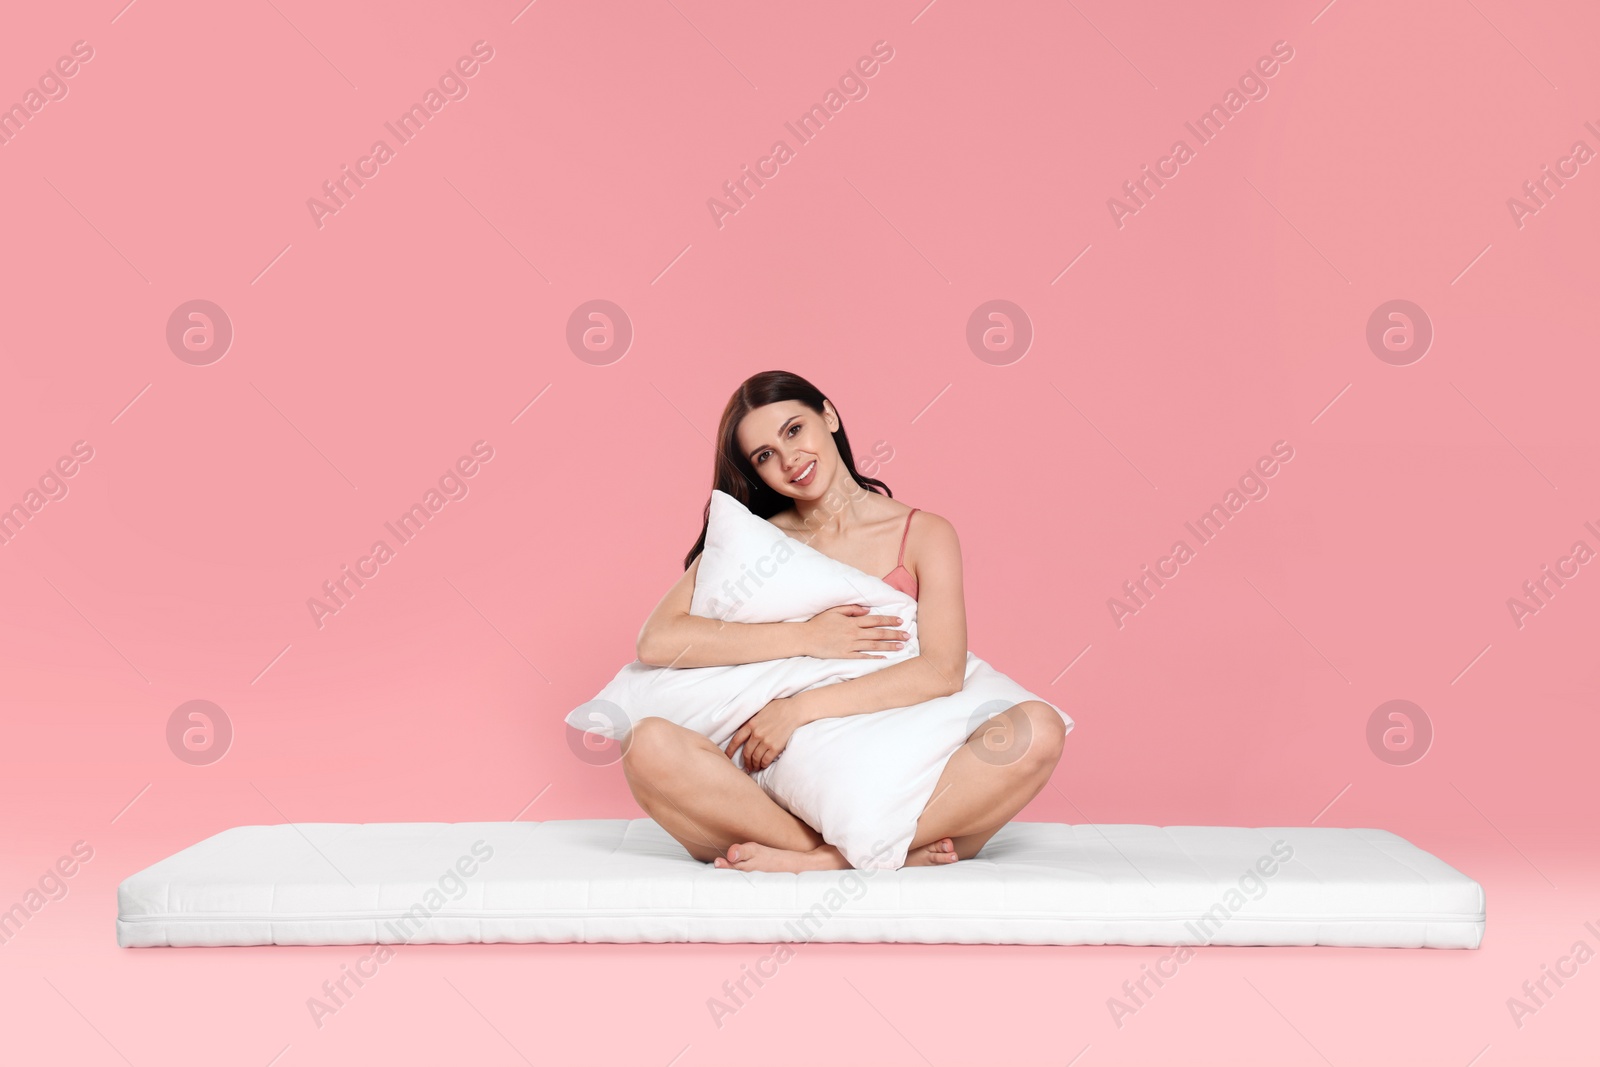 Photo of Young woman on soft mattress holding pillow against pale pink background